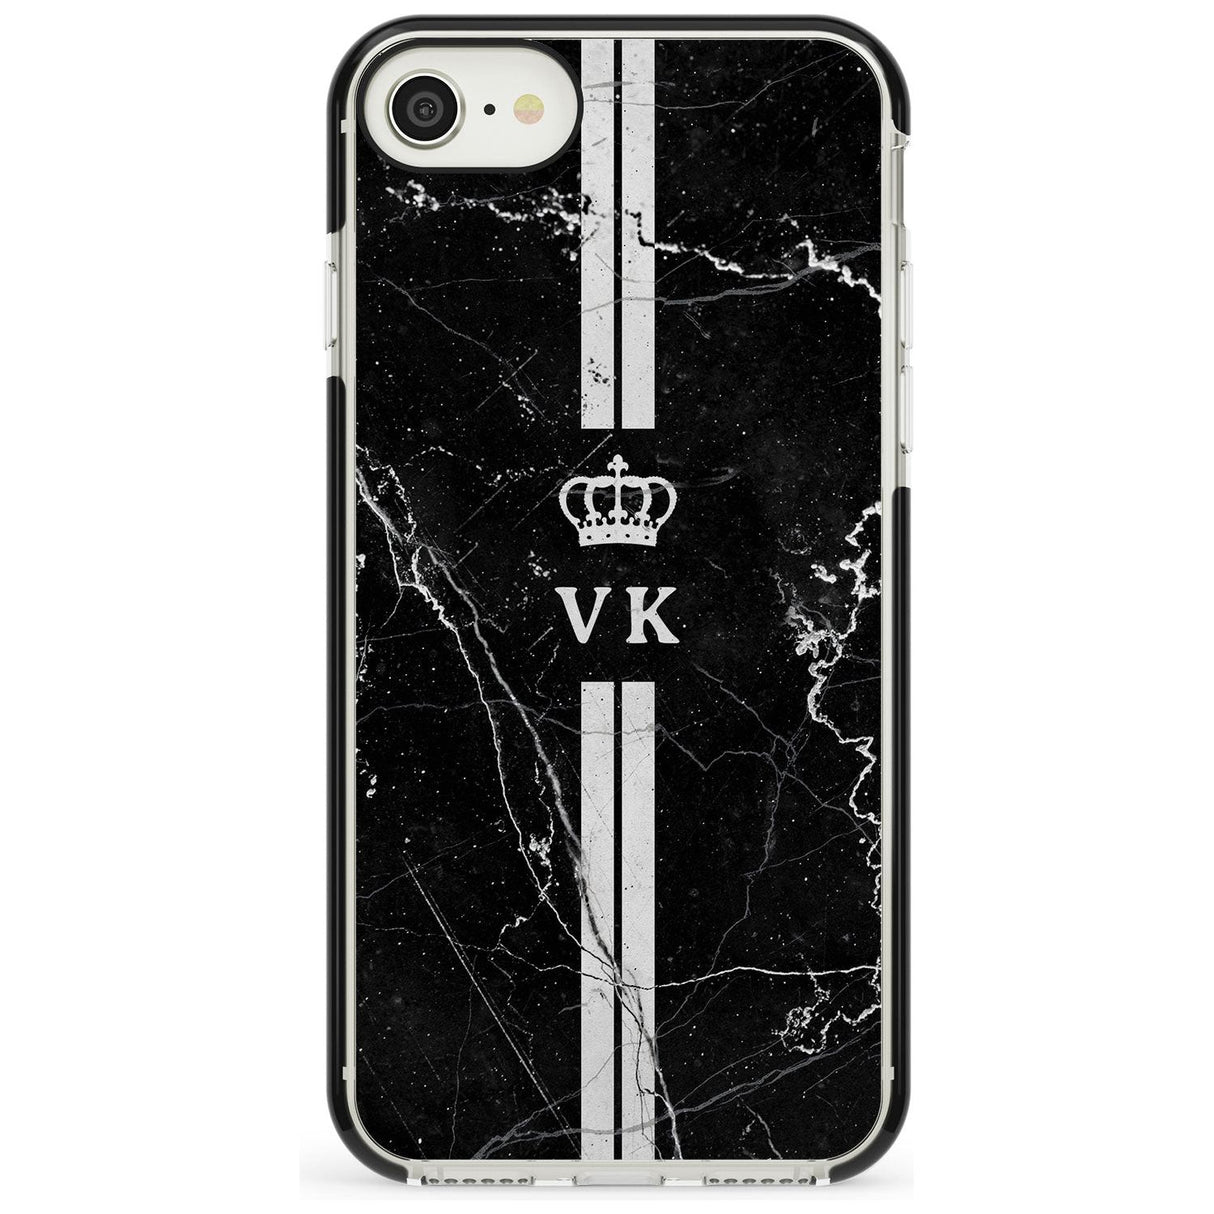 Stripes + Initials with Crown on Black Marble Black Impact Phone Case for iPhone SE 8 7 Plus